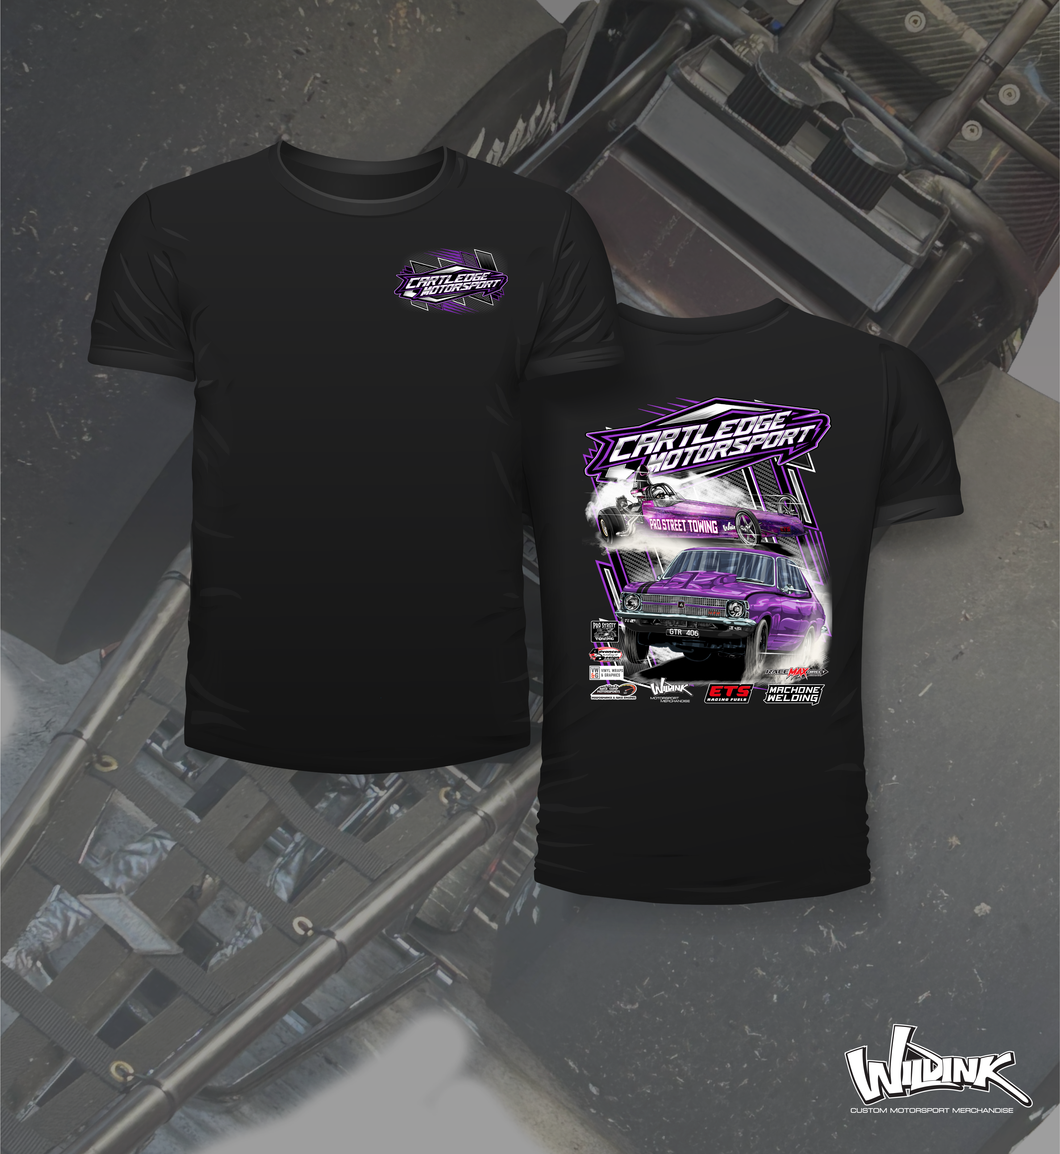 Cartledge Motorsports - Two Position Print Tee Shirt